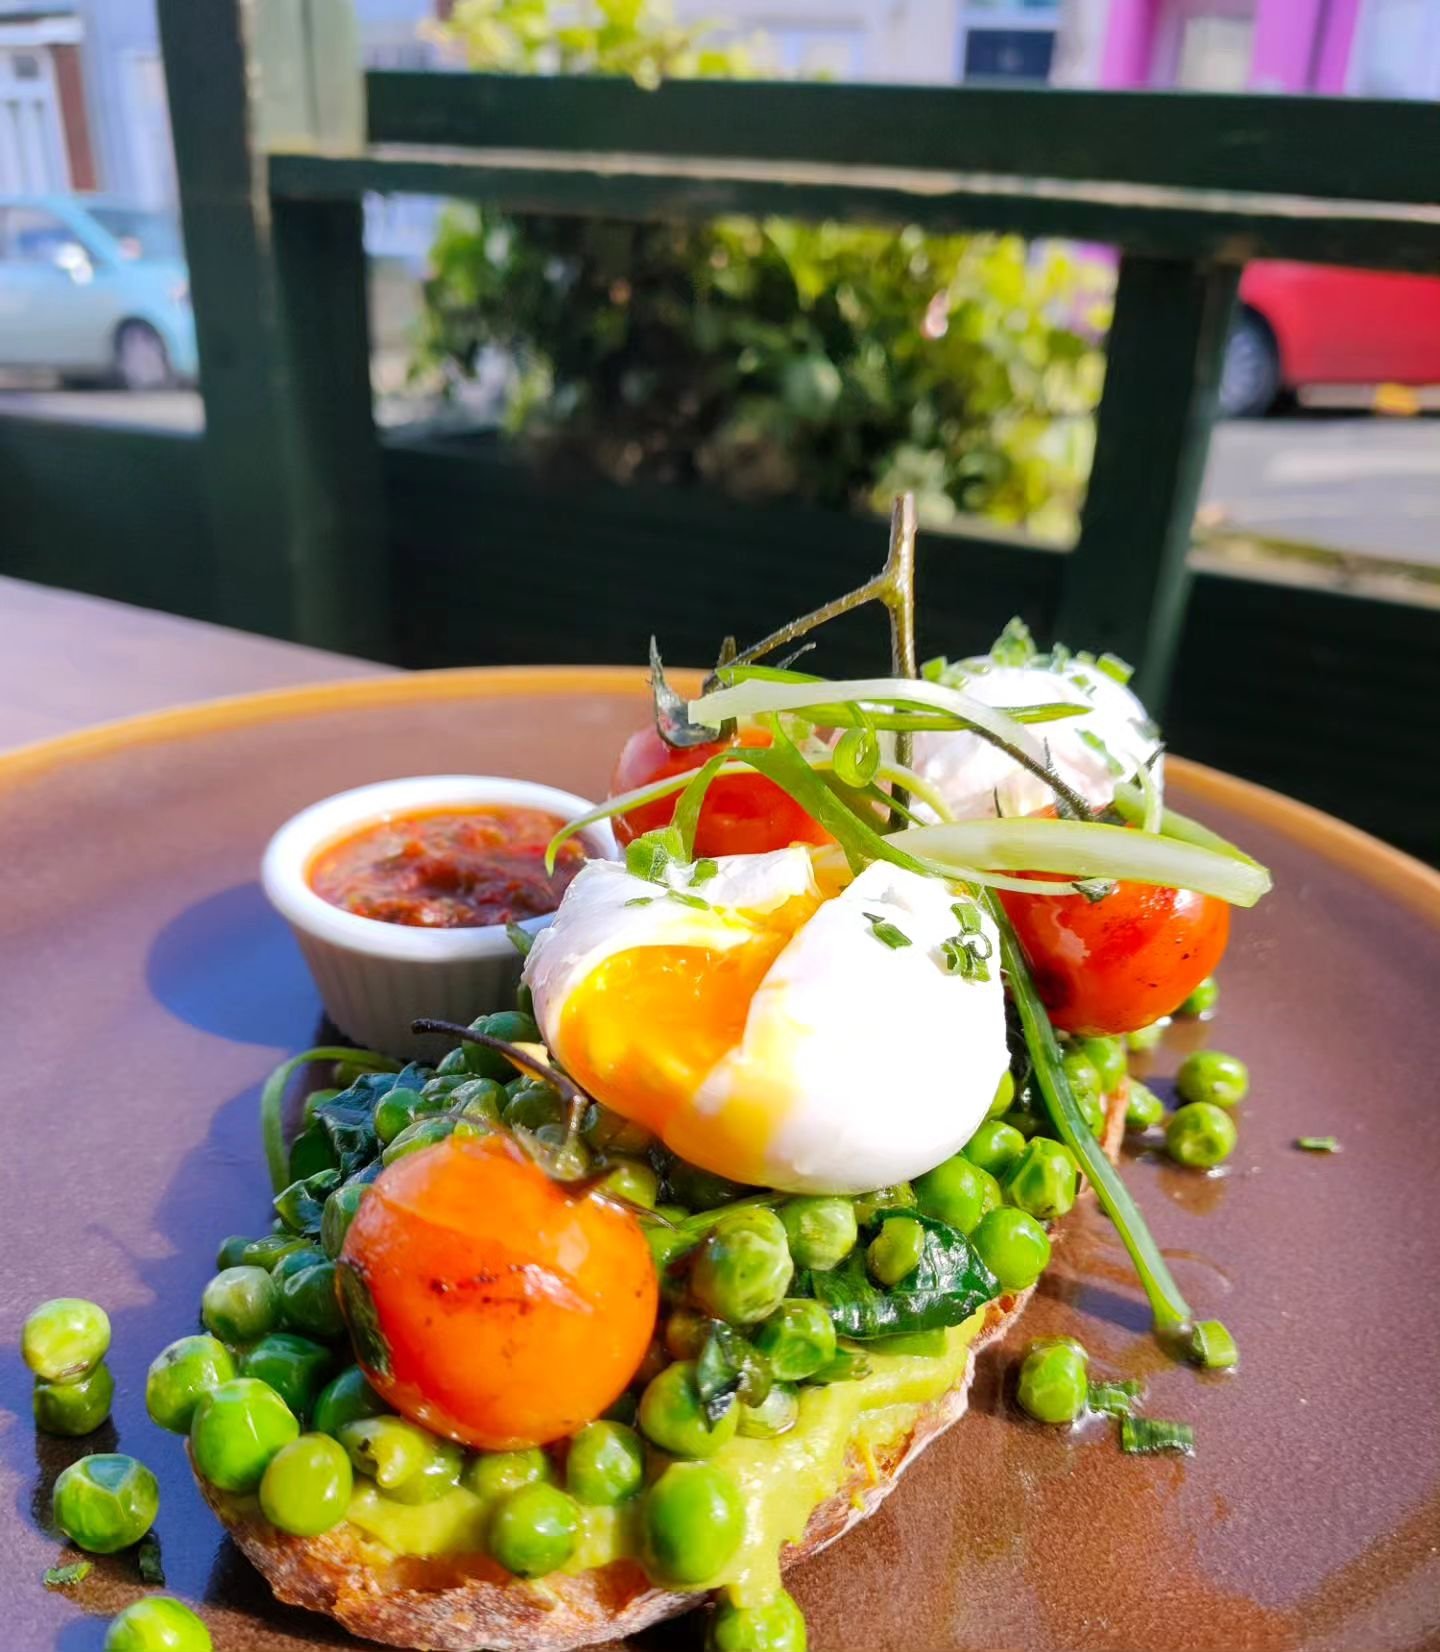 Sunday Brunch is back at Village 🍳 

Due to popular demand we're serving our delicious Brunch 9am-3pm on Sundays again 💛

 Mon-Sat- 8.30am-3pm

Here's our Village toast with added poached eggs paired with our homemade harrisa 🤤

Have a great Sunda